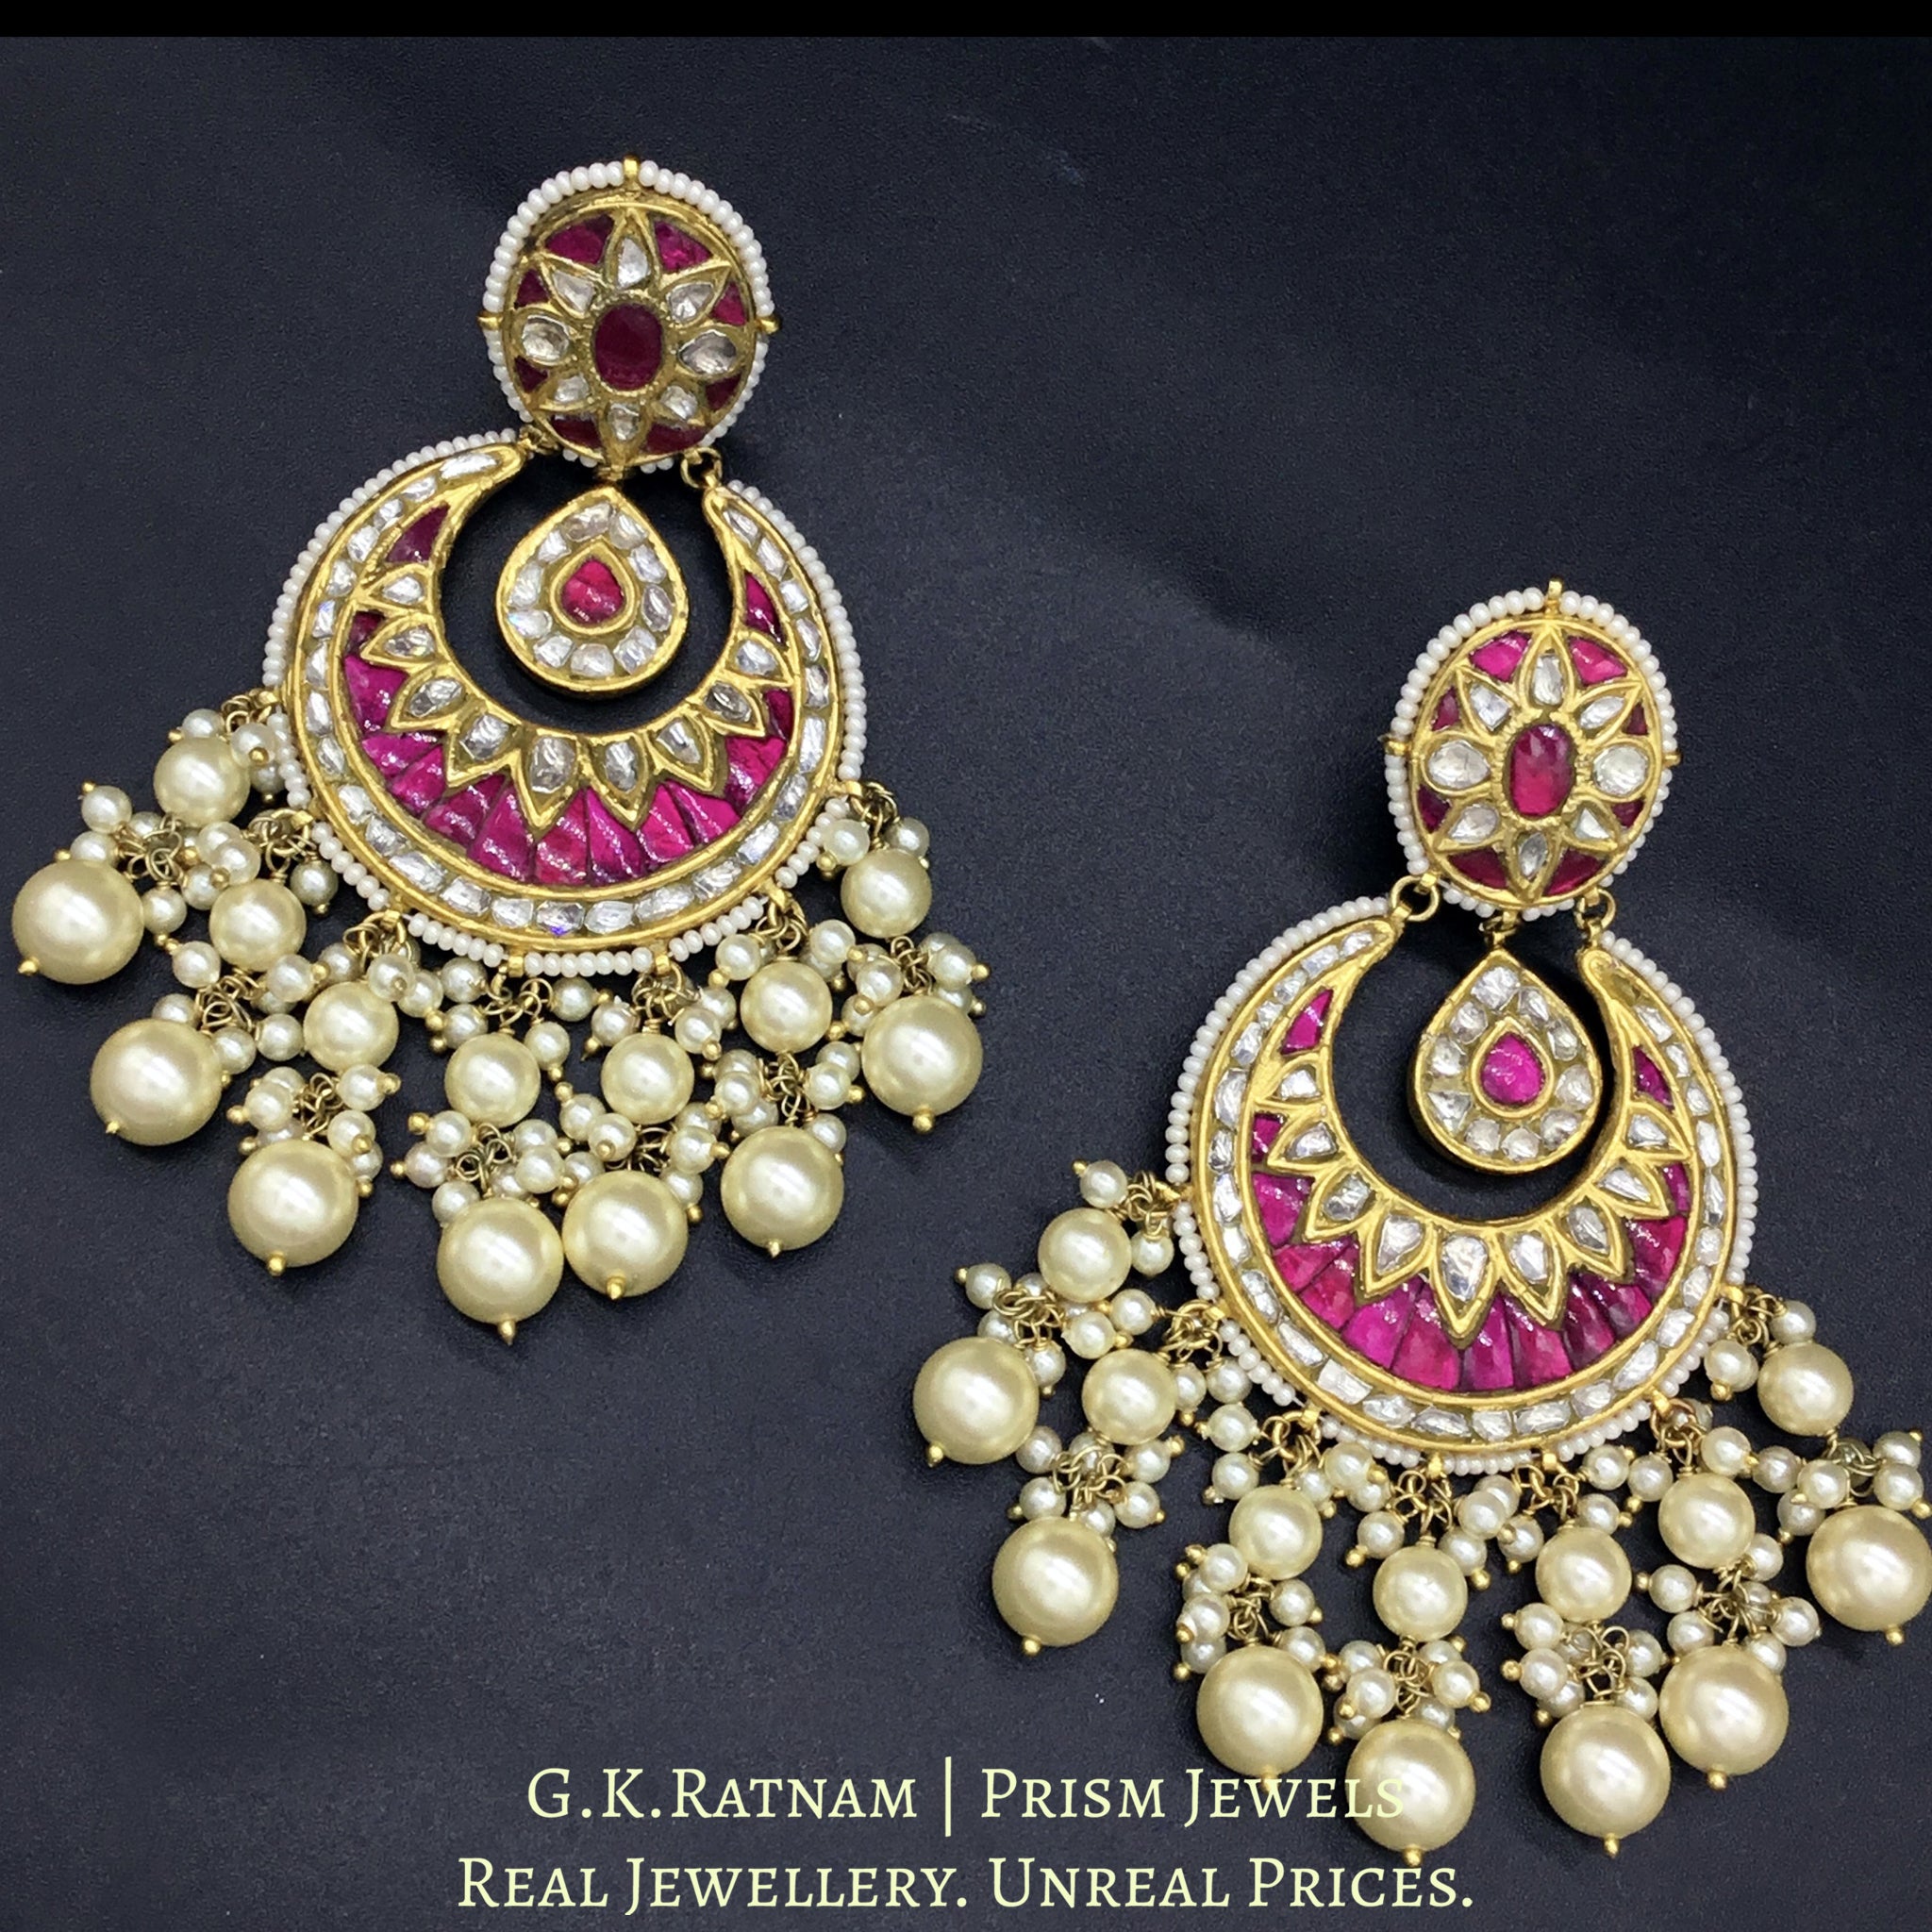 23k Gold and Diamond Polki Chand Bali Earring pair with Rubies